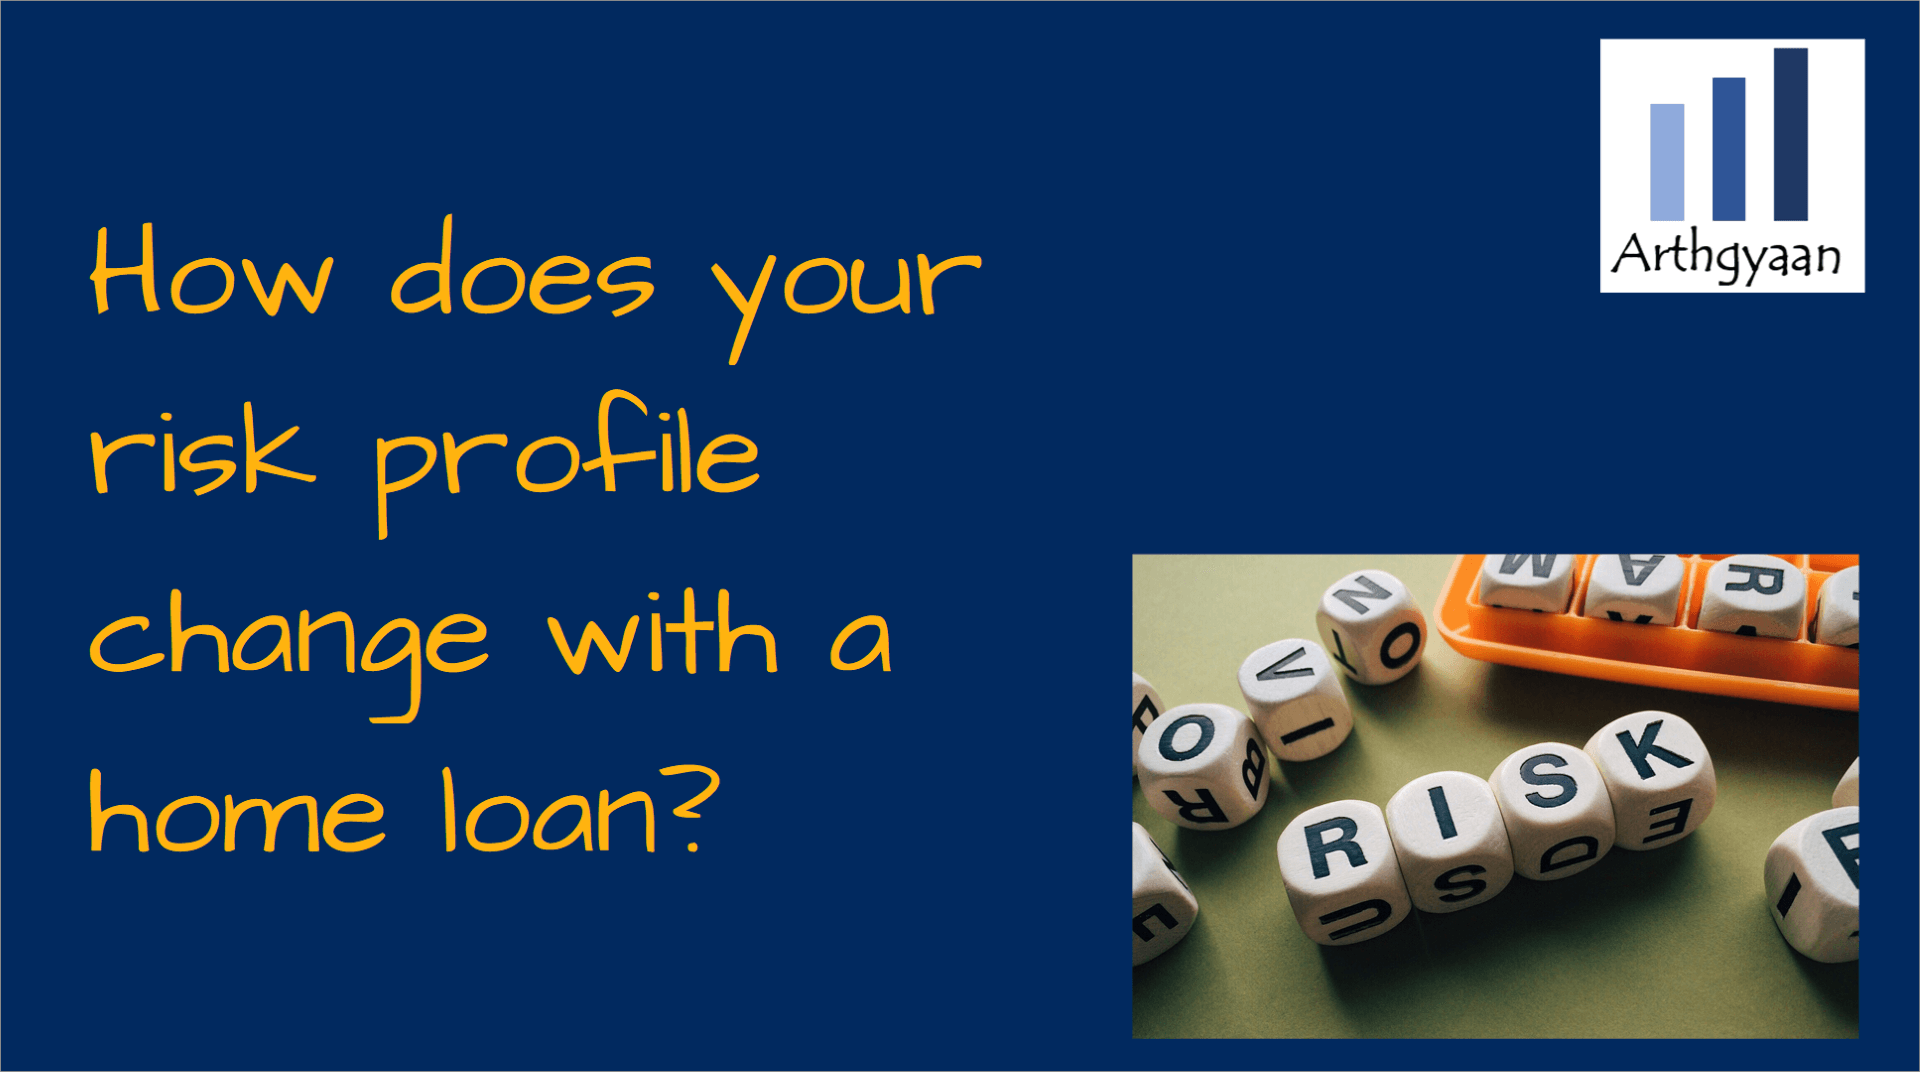 How does your risk profile change with a home loan?